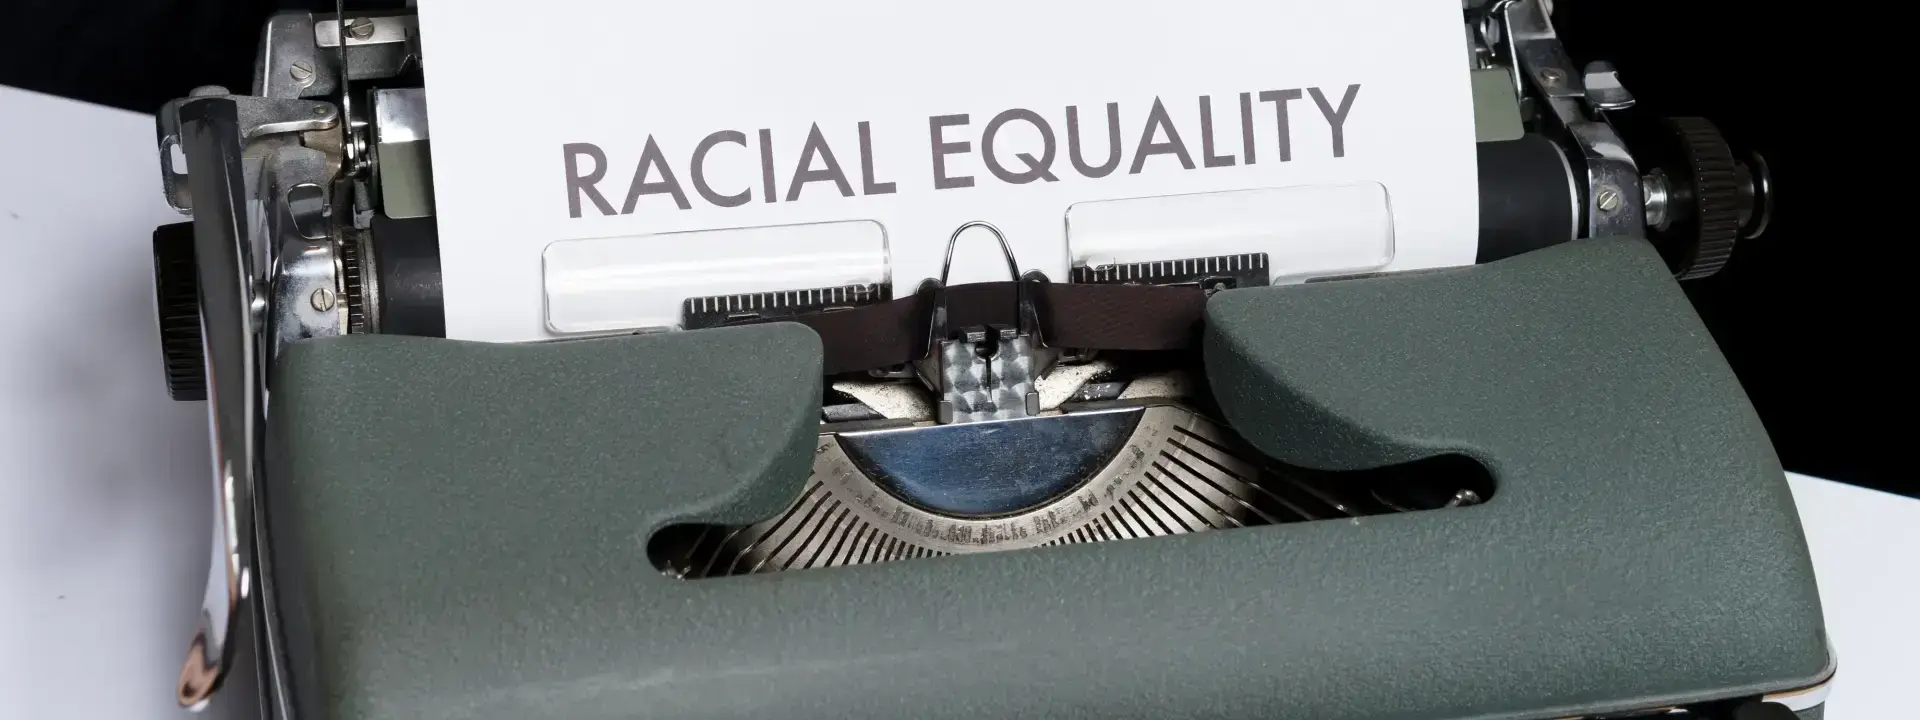 Ethnicity and Racial Discrimination in the Workplace